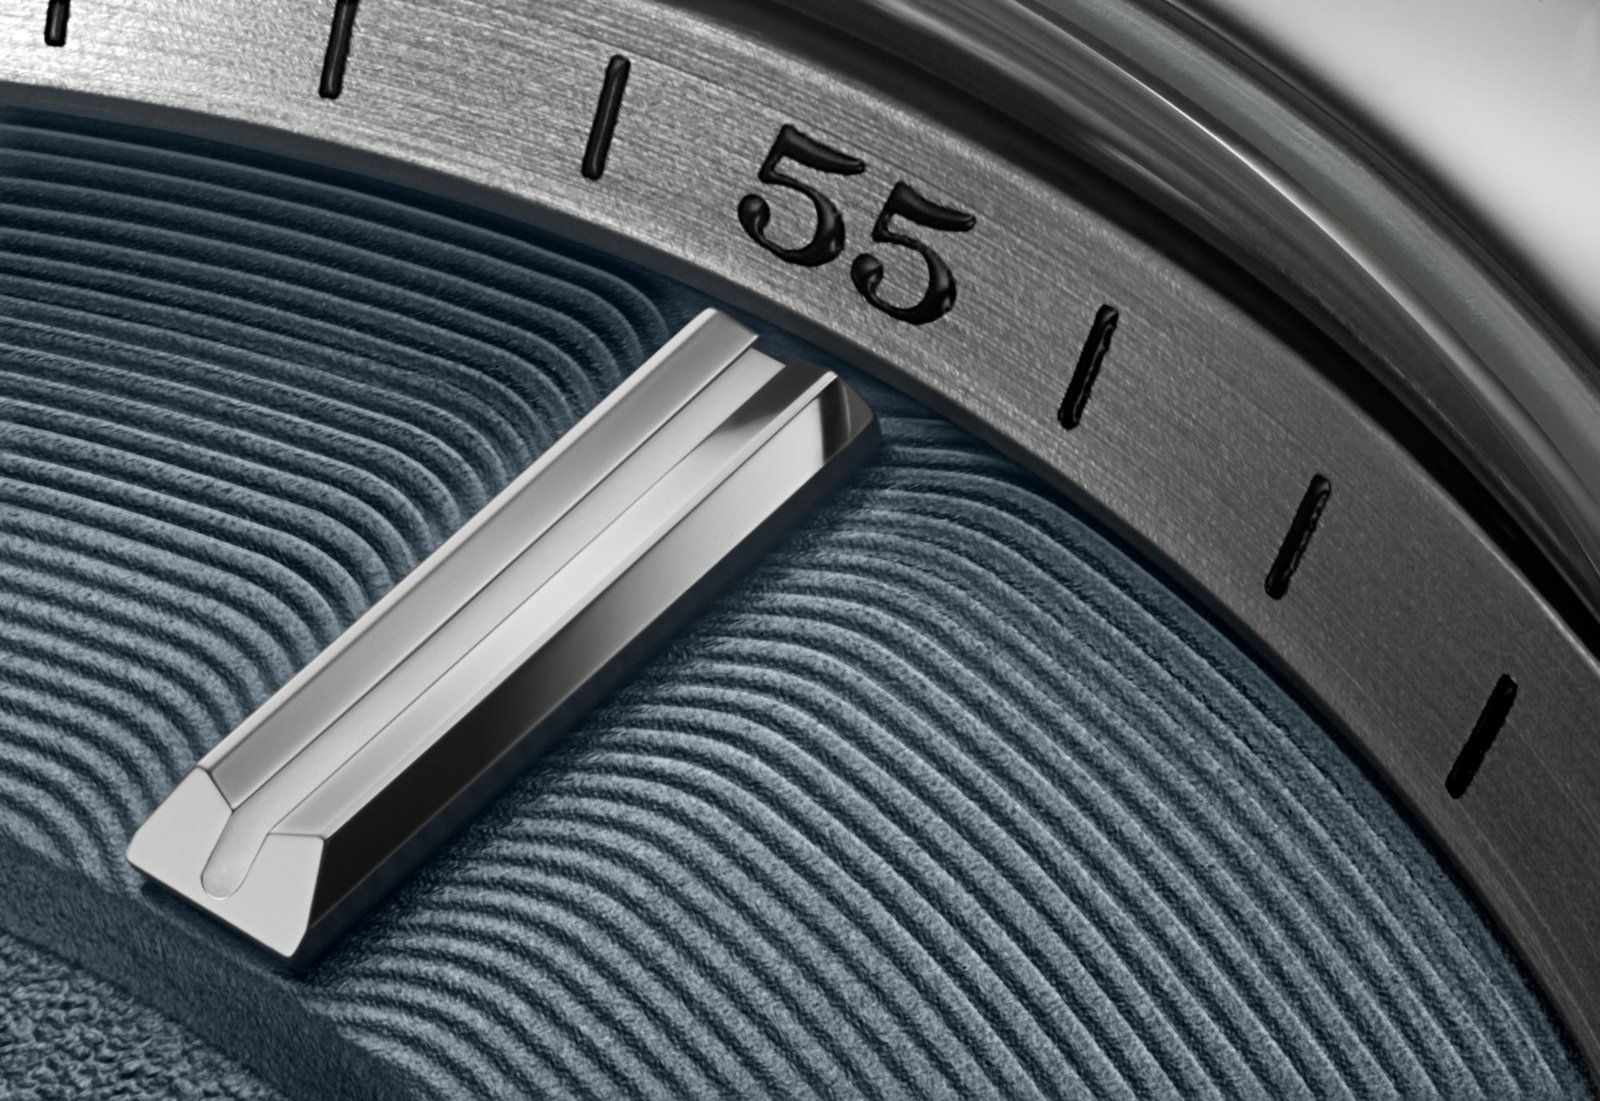 A meticulously-designed timepiece, featuring a multi-part dial